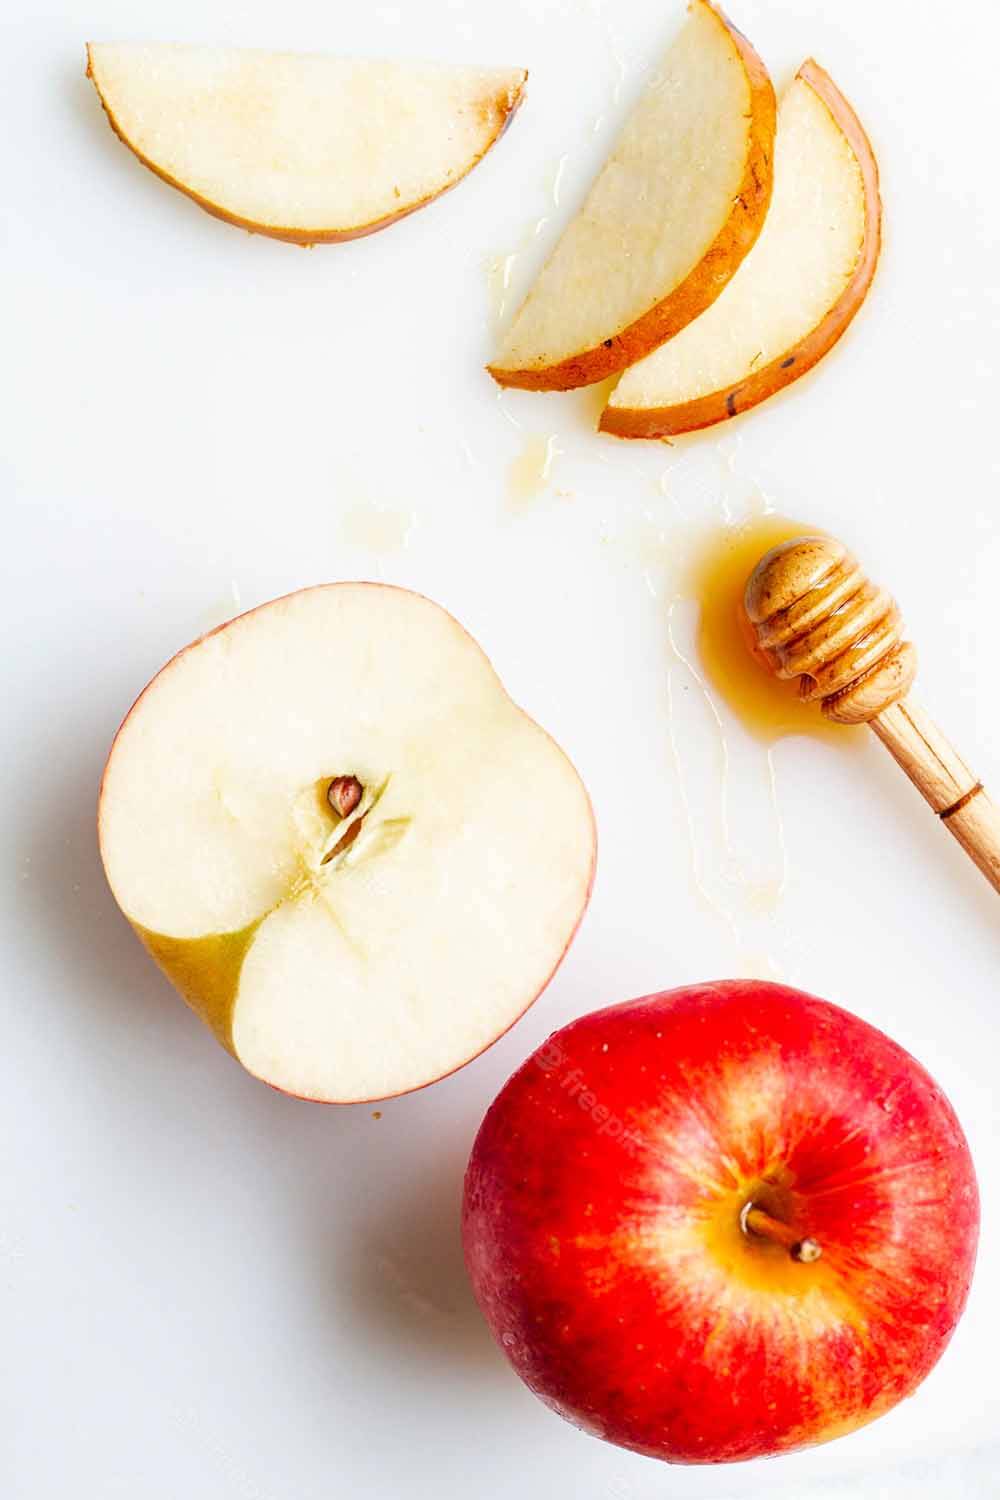 Different Types Of Apples and How To Enjoy Them